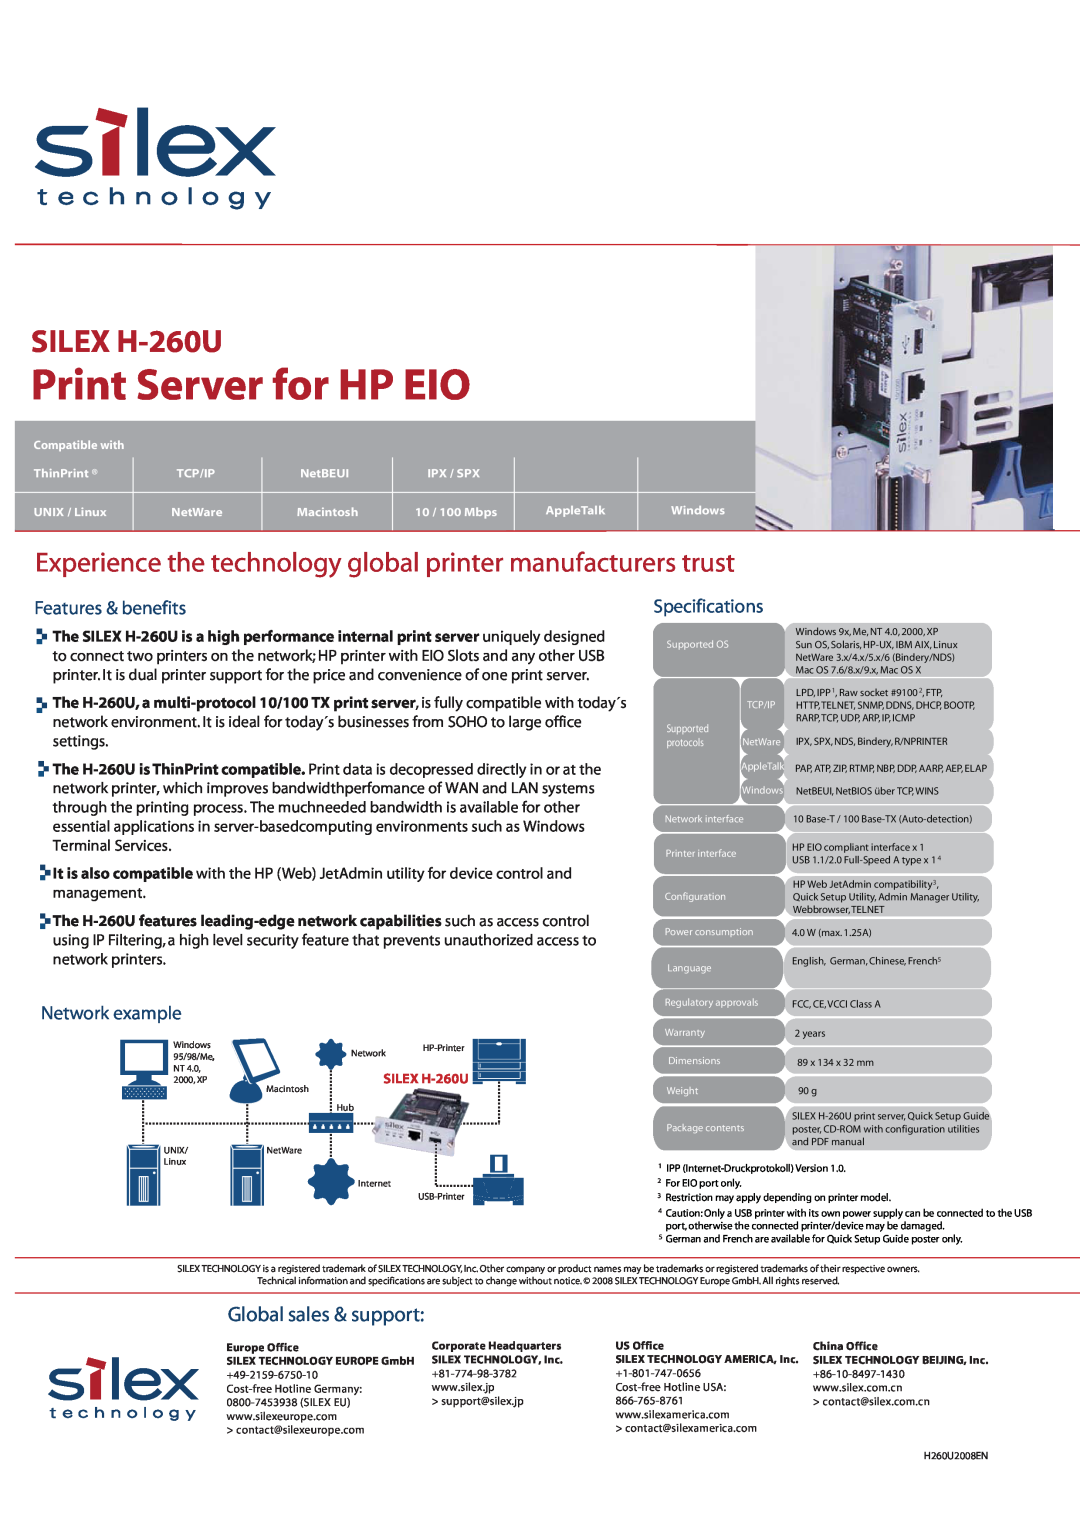 Silex technology specifications Print Server for HP EIO, SILEX H-260U, Global sales & support, Features & benefits 